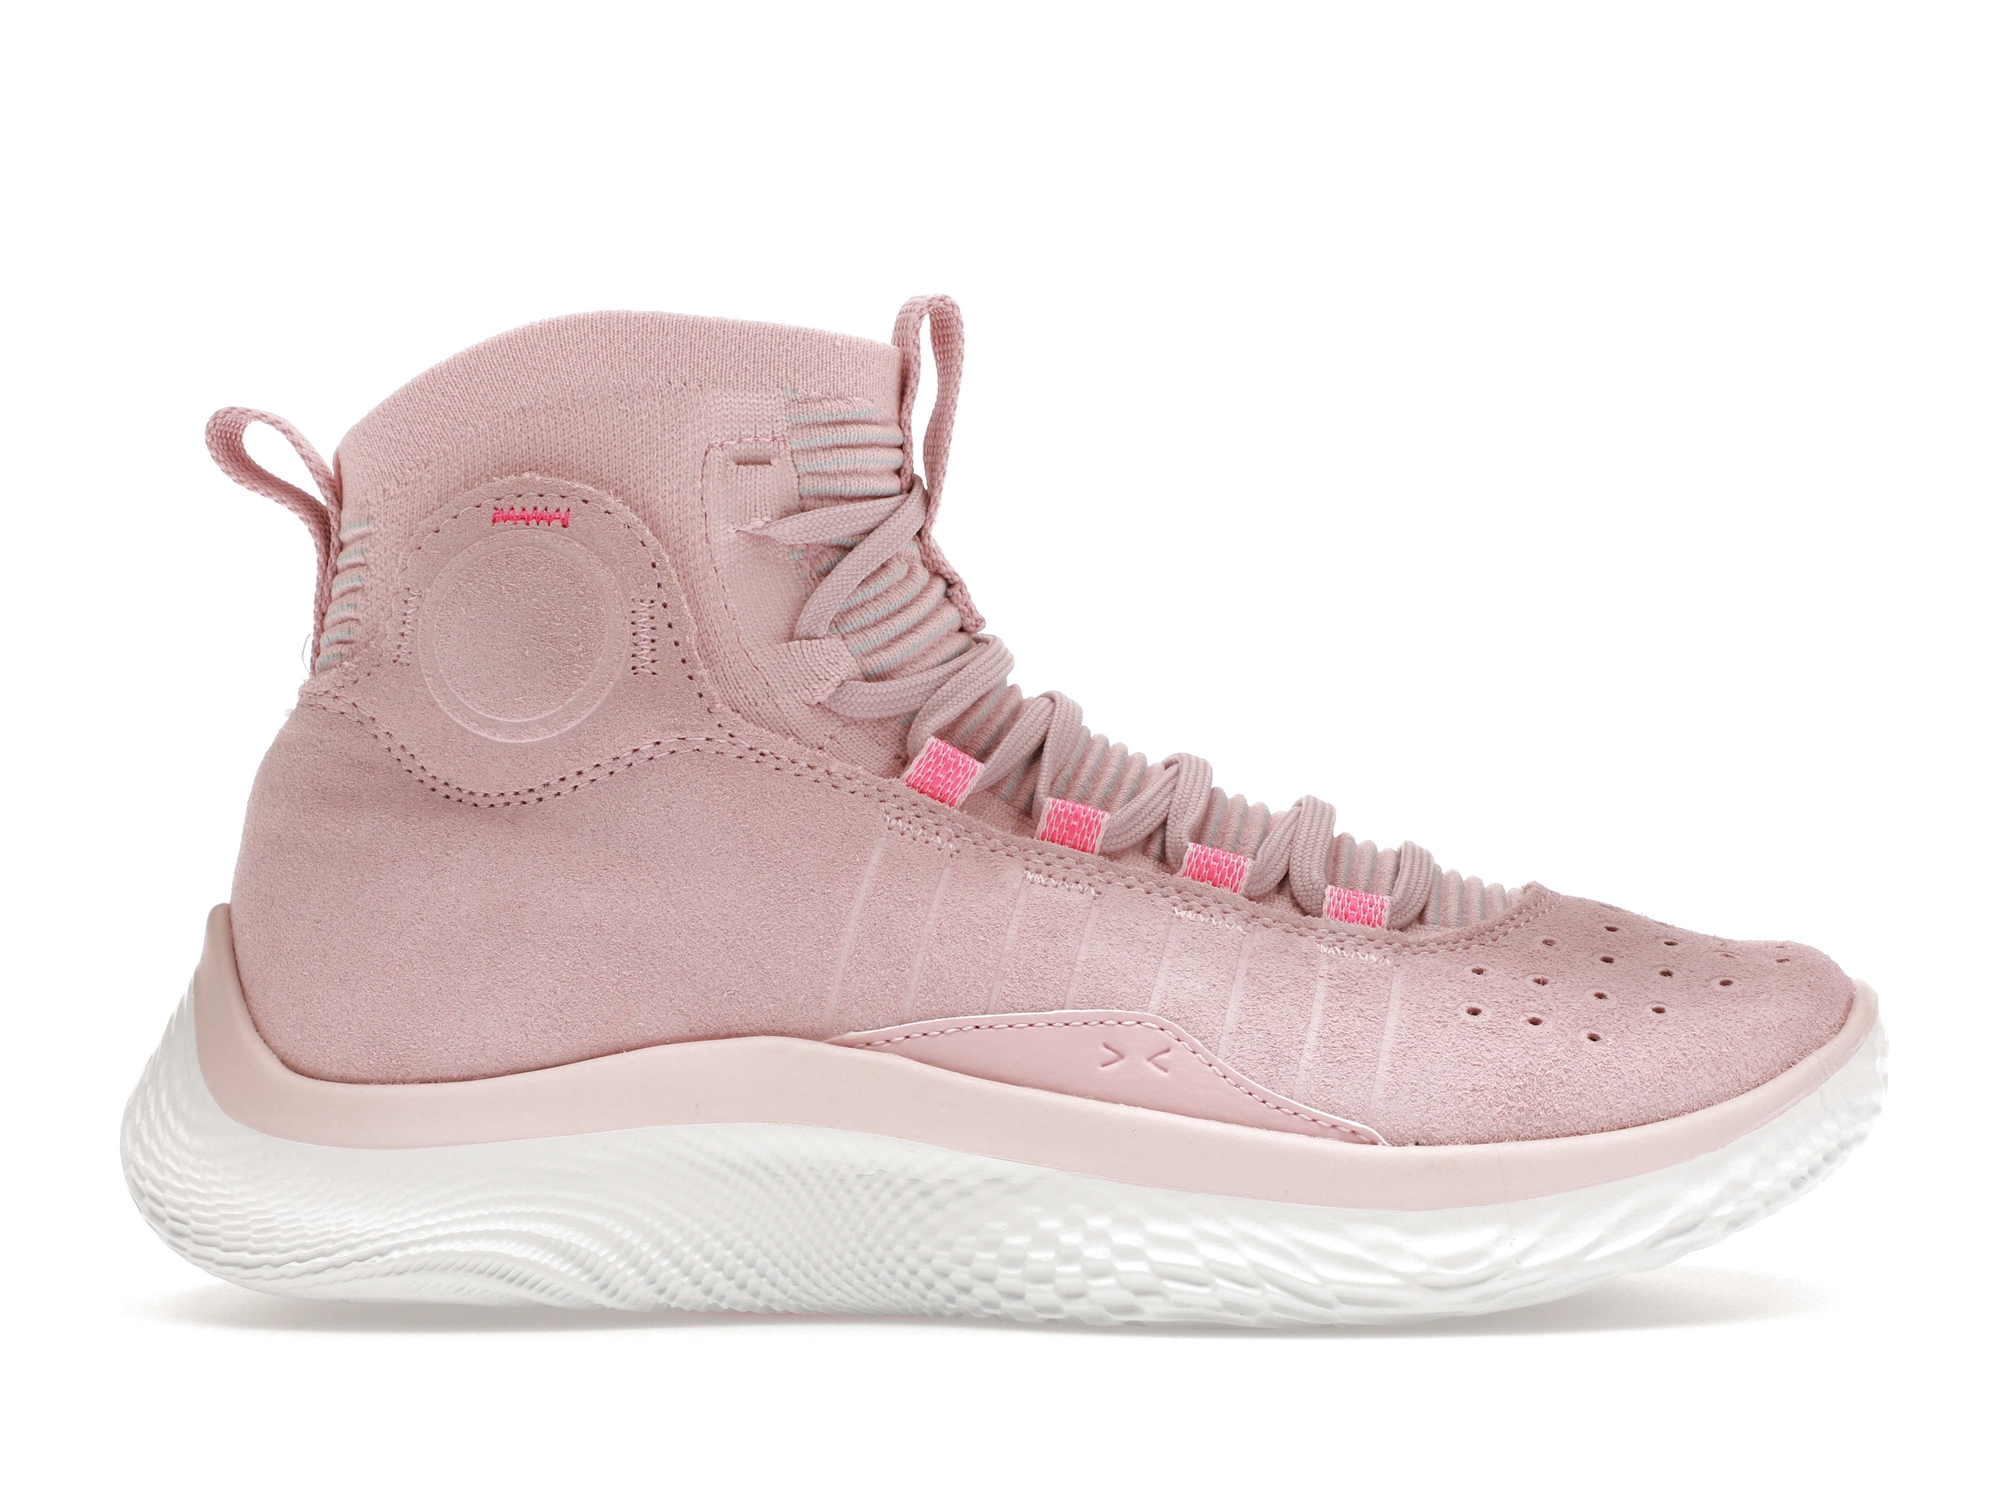 Under Armour Curry 4 Flotro Pink メンズ - 3024861-600 - JP